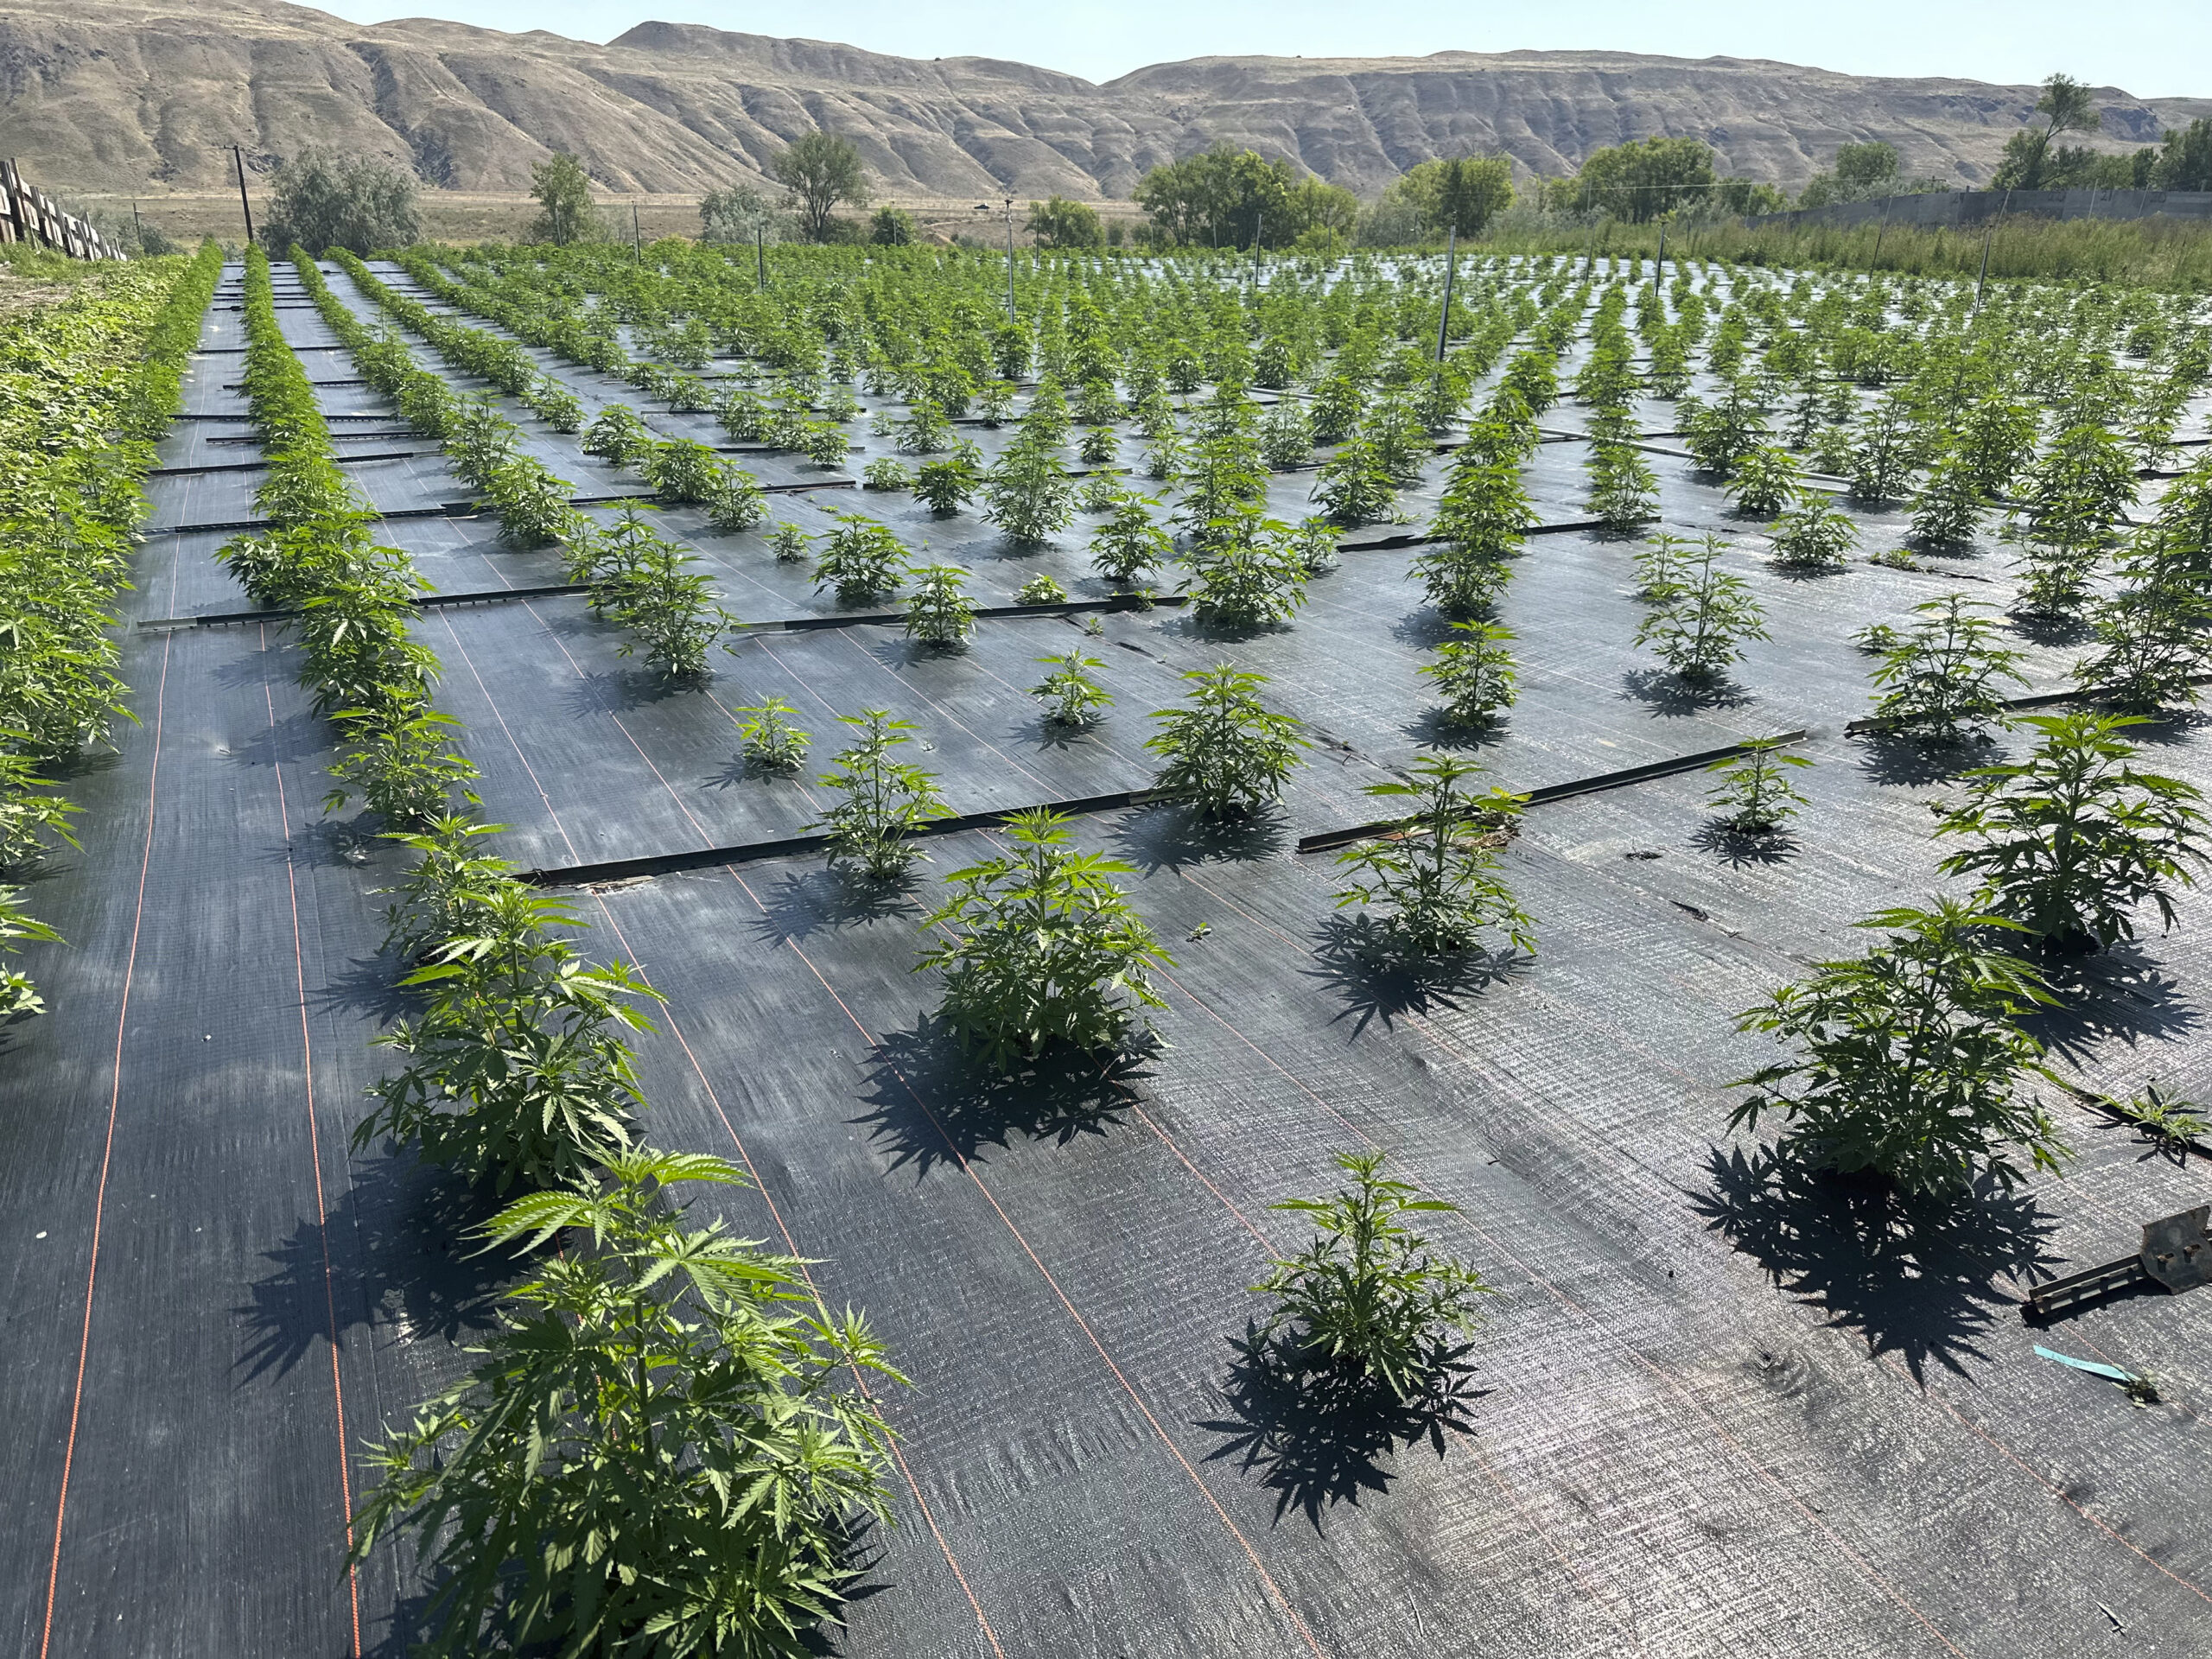 Landscape fabric covers the ground at a legal cannabis farm near Brewster, in north-central Washing...